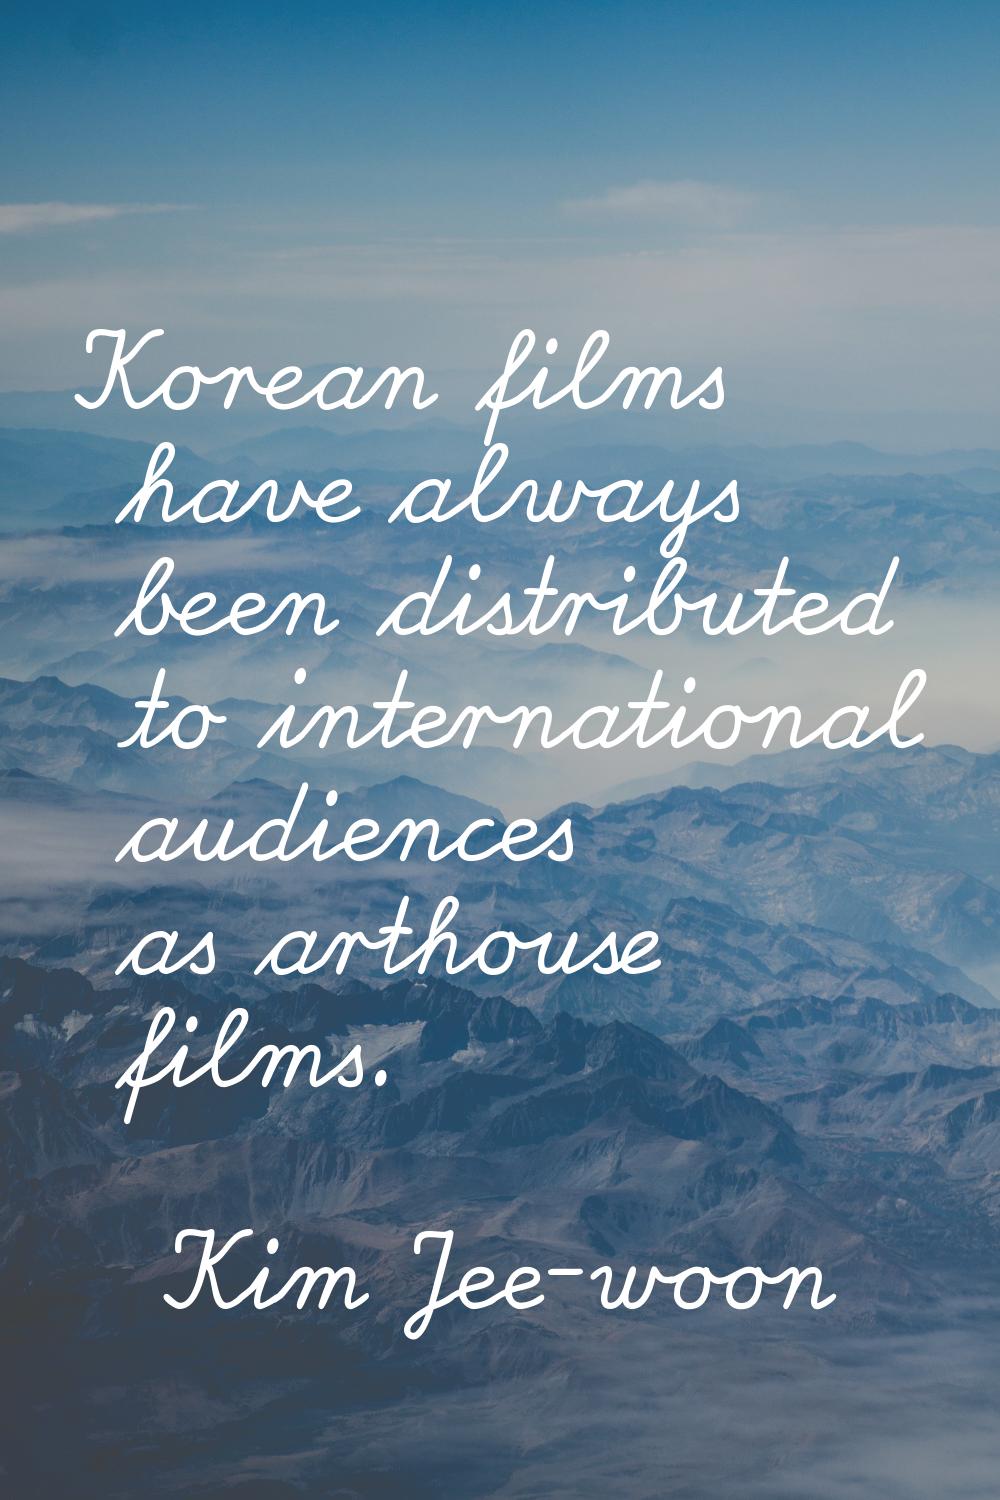 Korean films have always been distributed to international audiences as arthouse films.